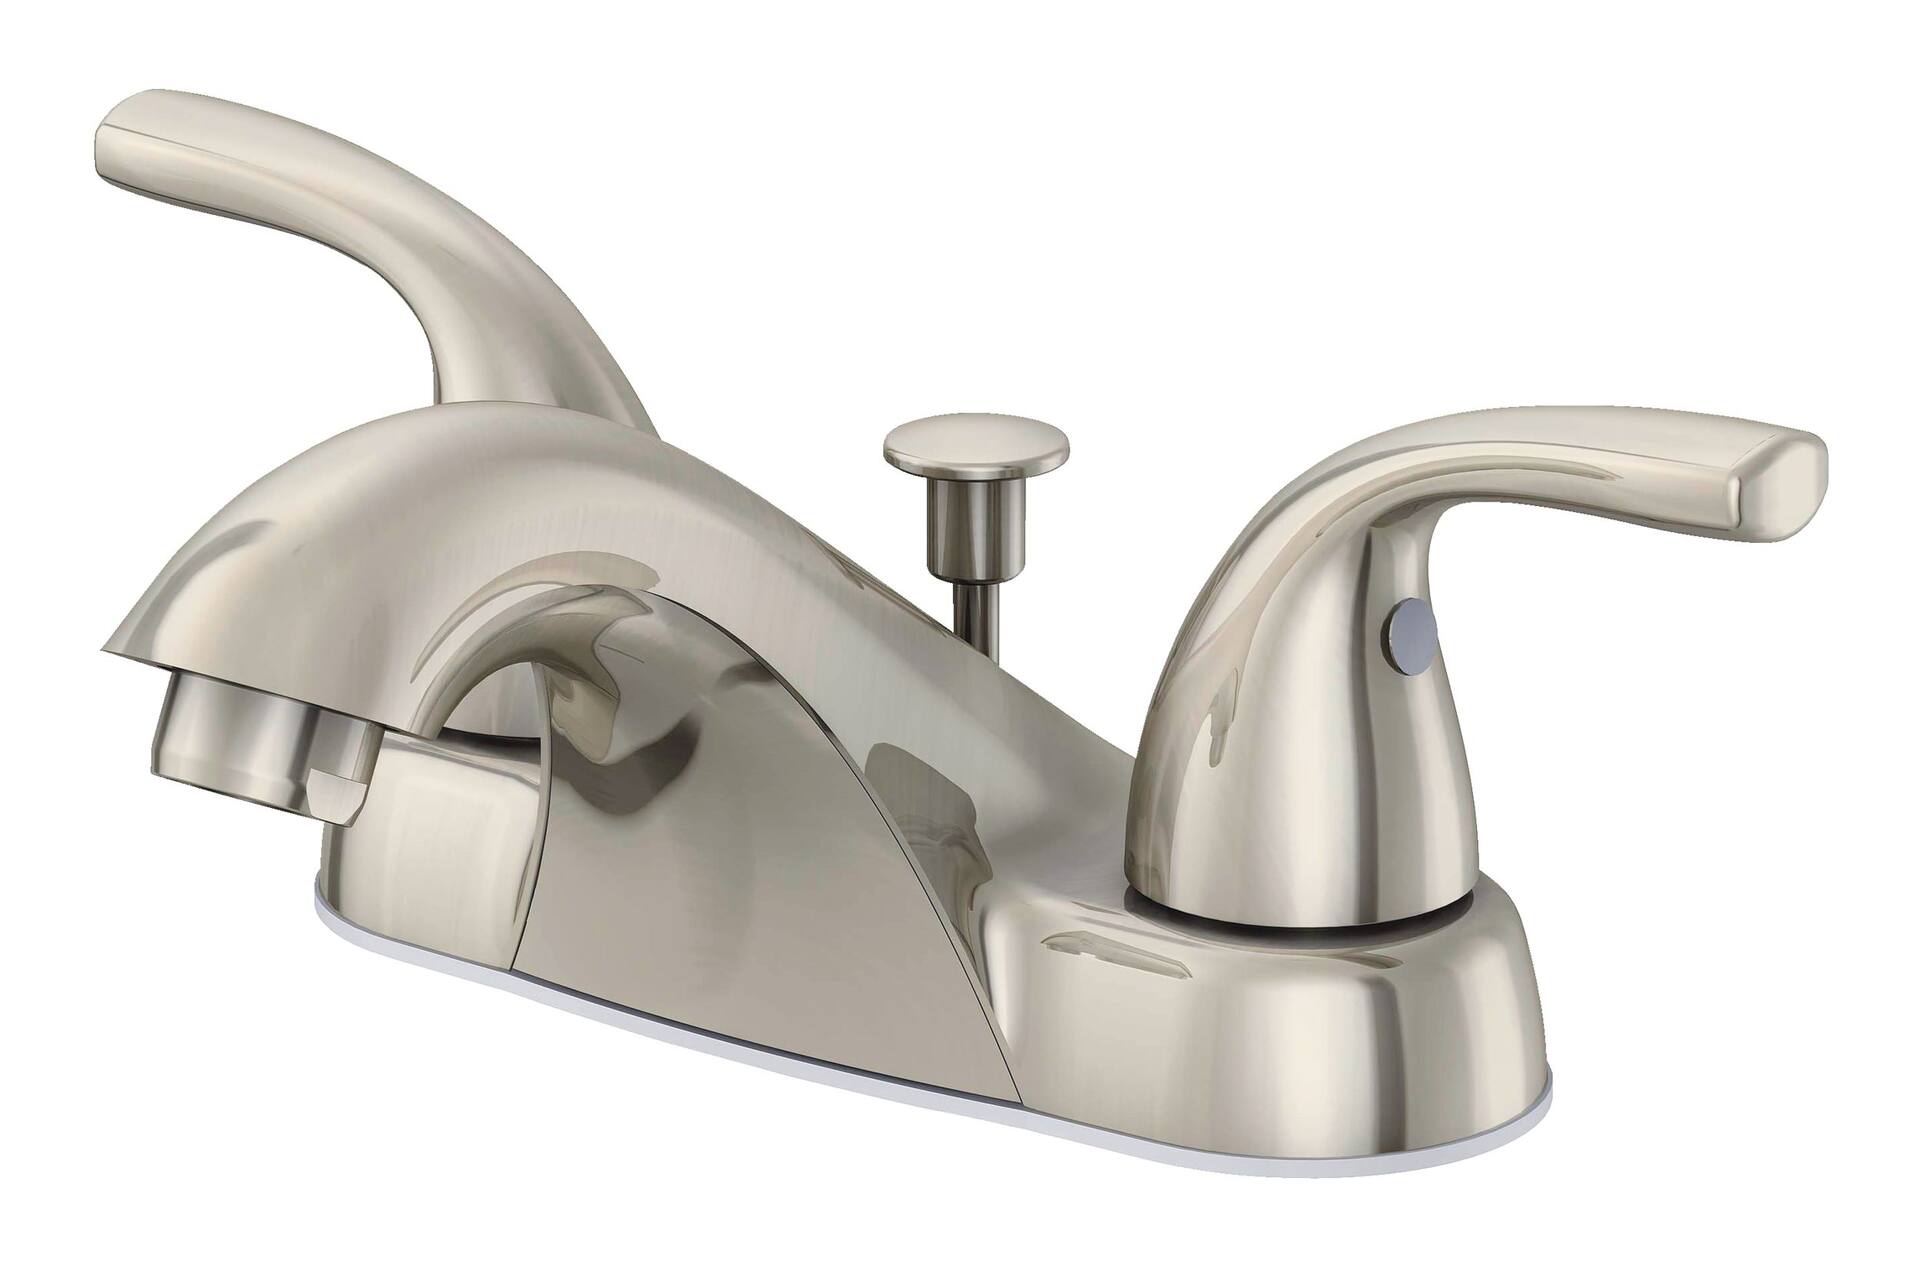 aimee arends recommends How To Use A Bathtub Faucet For Pleasure